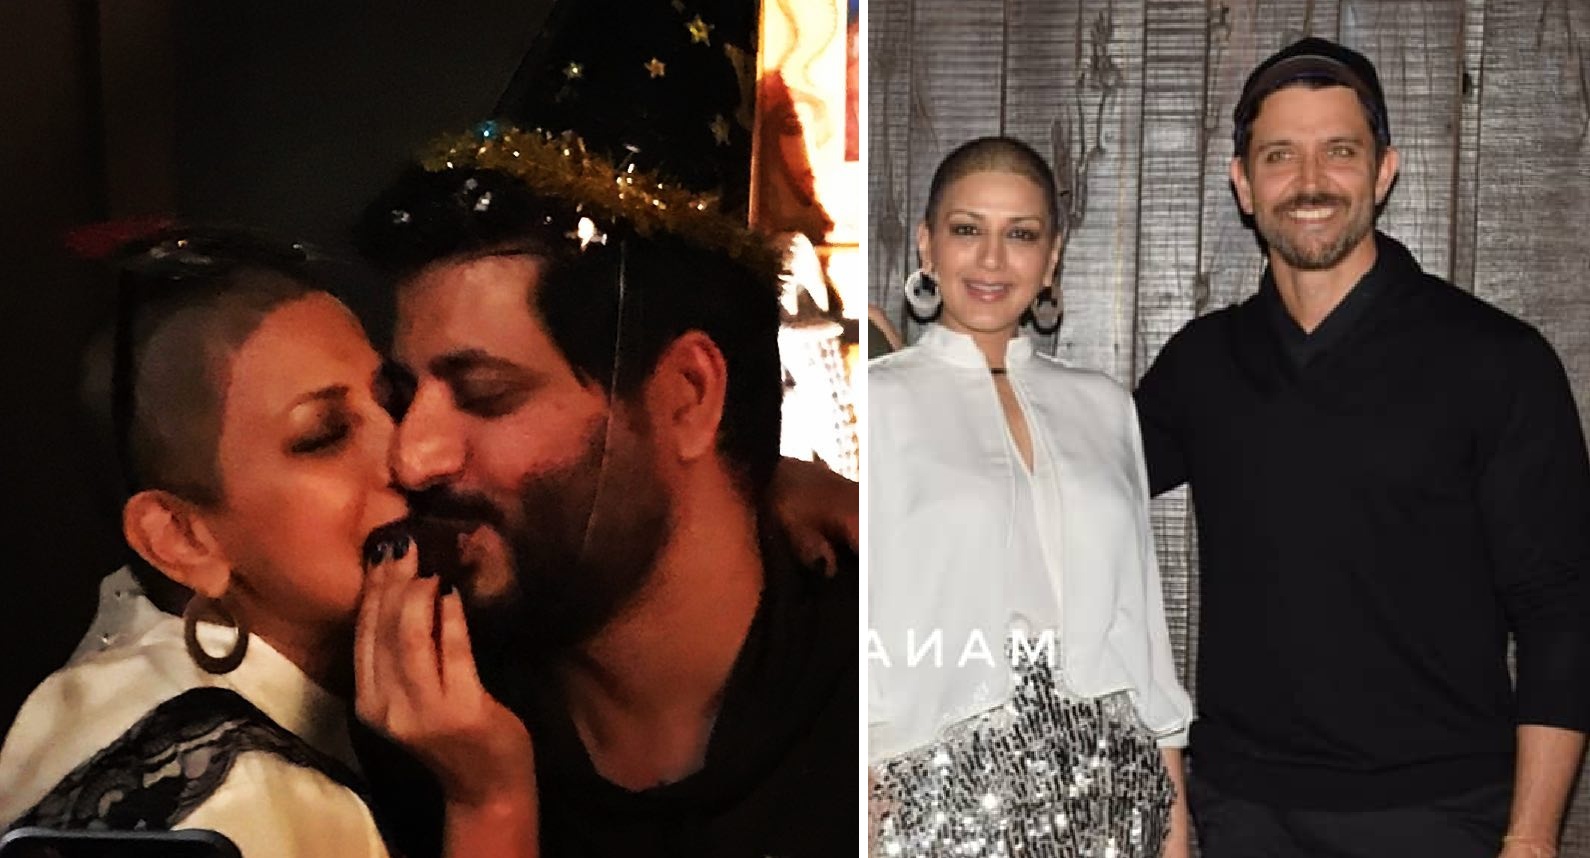 Sonali Bendre Celebrates Her 44th Birthday in Mumbai With Close Friends and Family Members